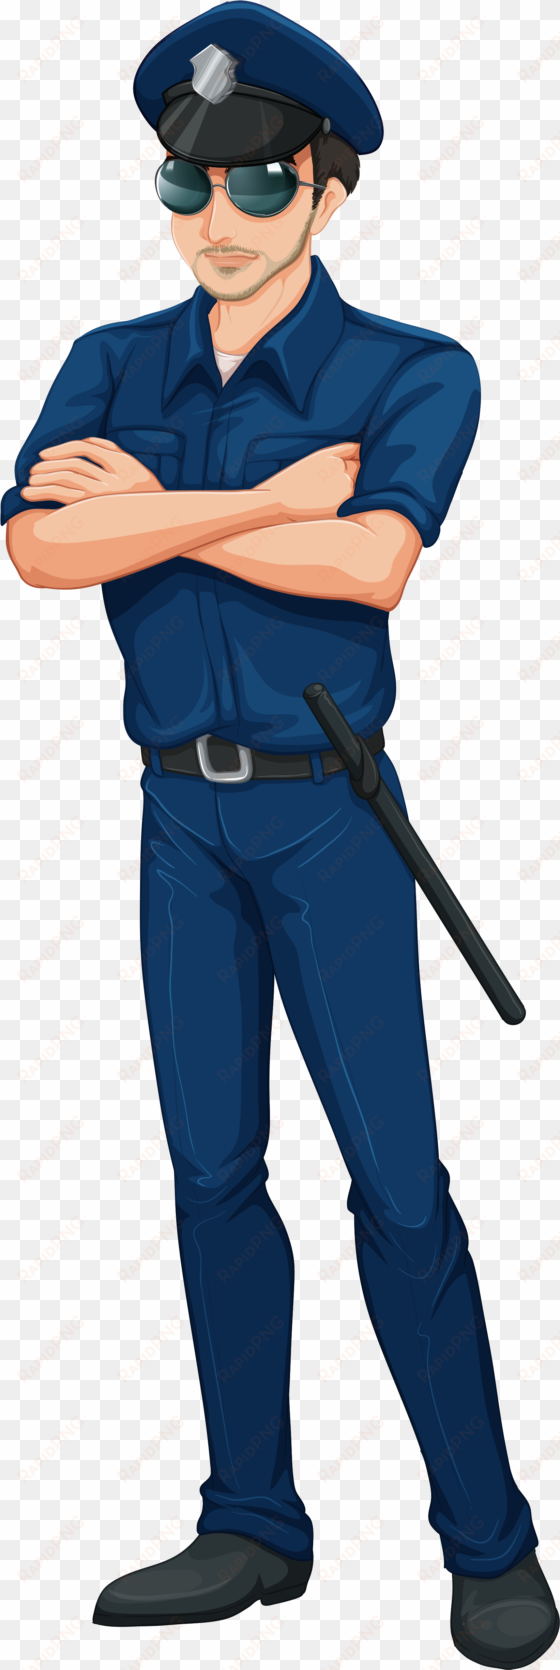 Police Png Clipart transparent png image